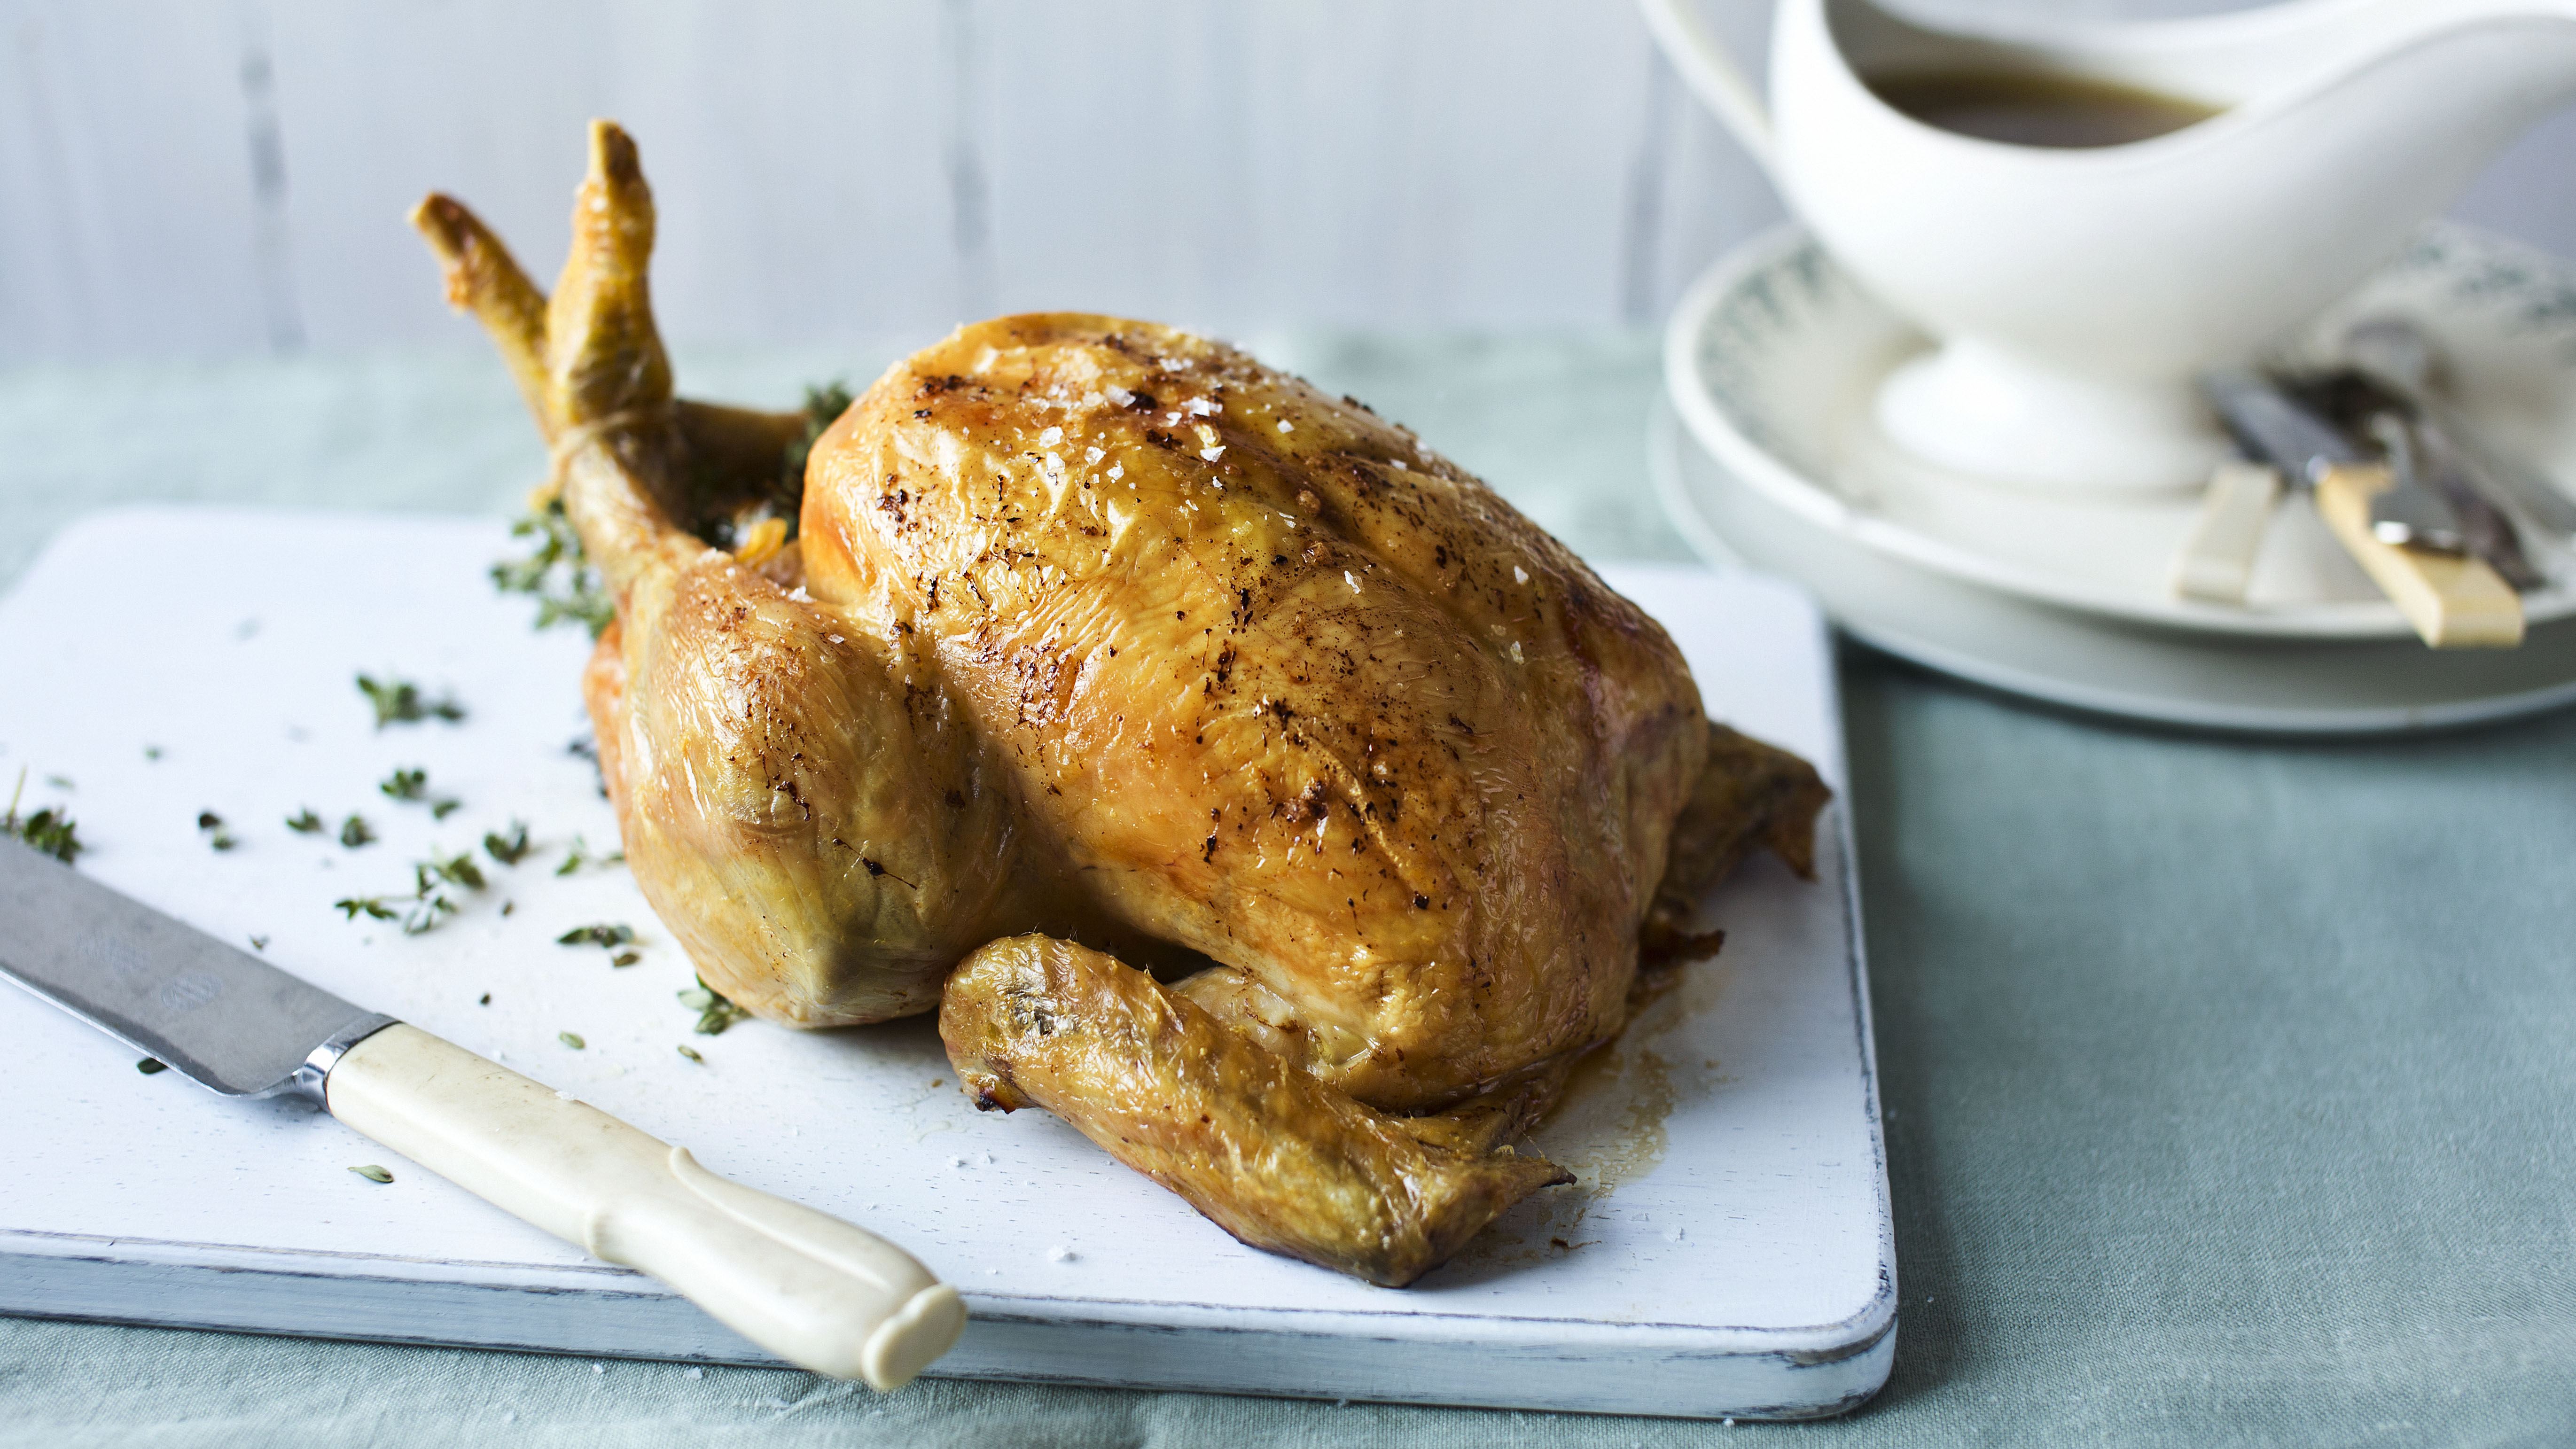 Slow-cooked roast chicken with gravy recipe - BBC Food